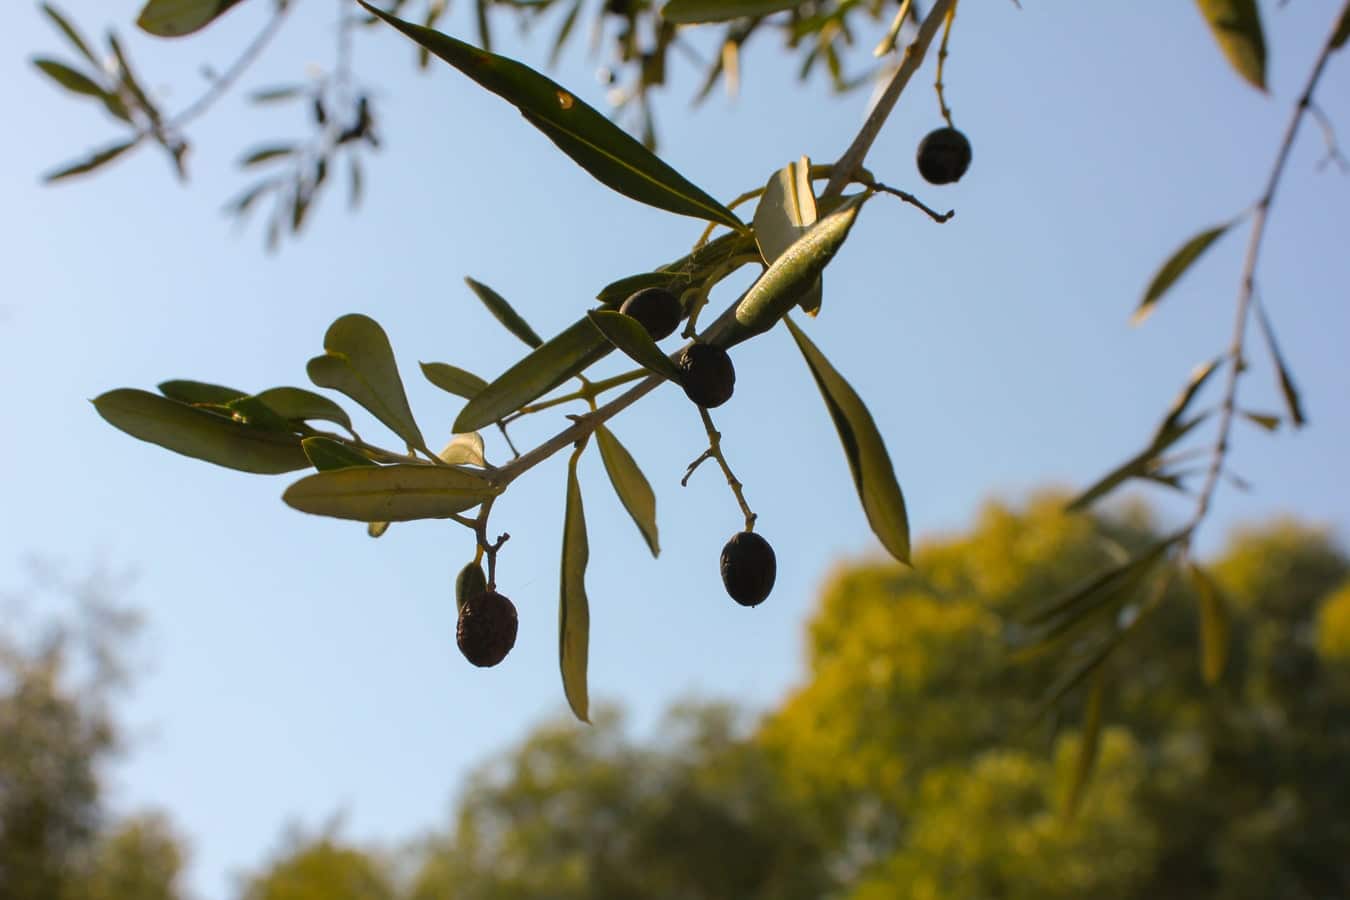 Lifespan Of Olives And What It Depends On